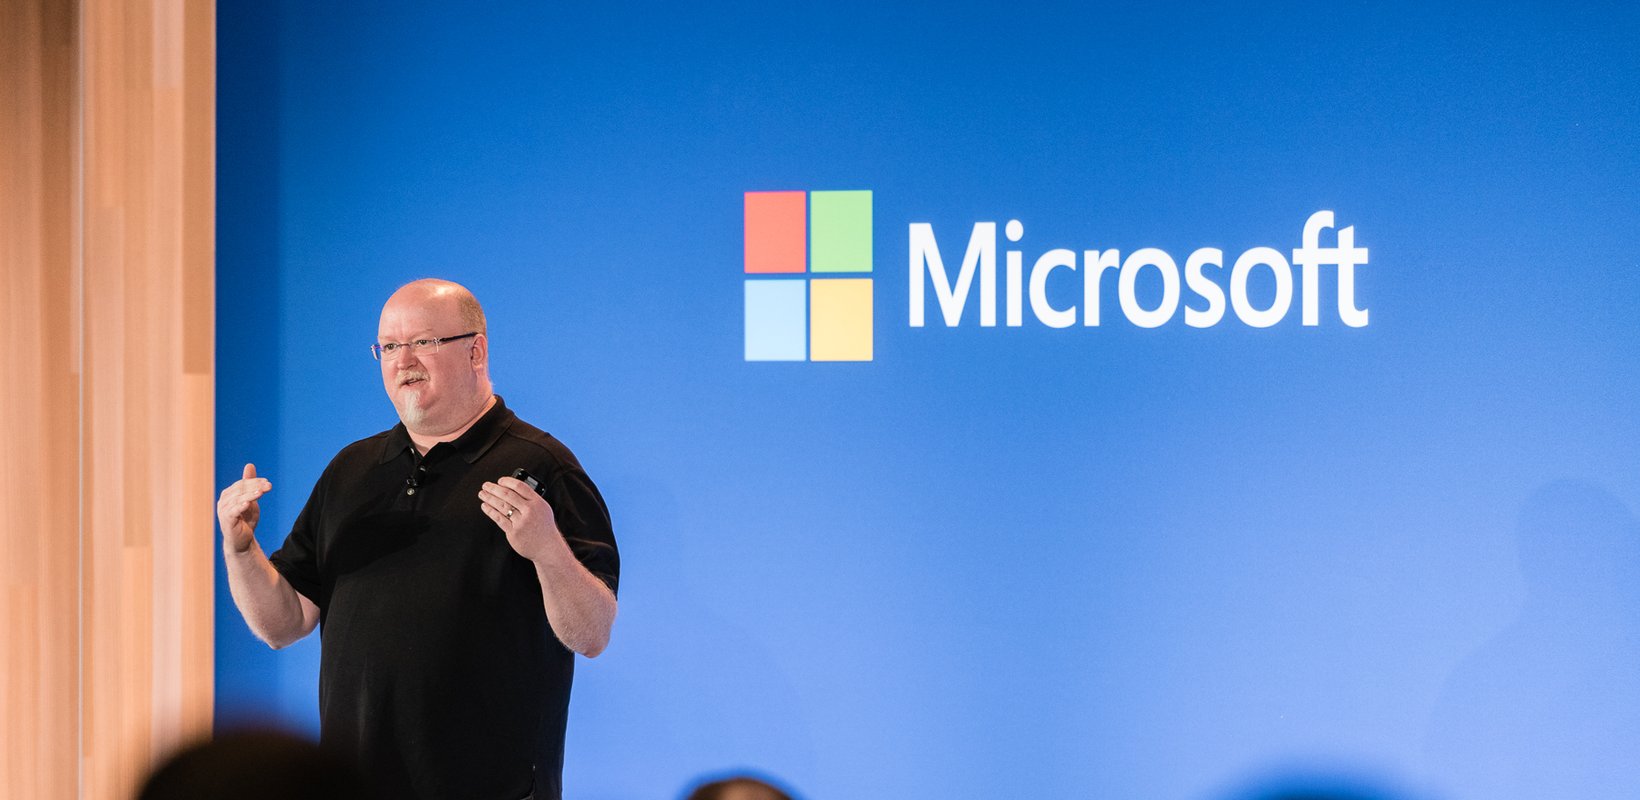 Microsoft CTO, Kevin Scott, addresses an audience regarding the importance of Artificial Intelligence (AI) learning with Microsoft's logo in the background